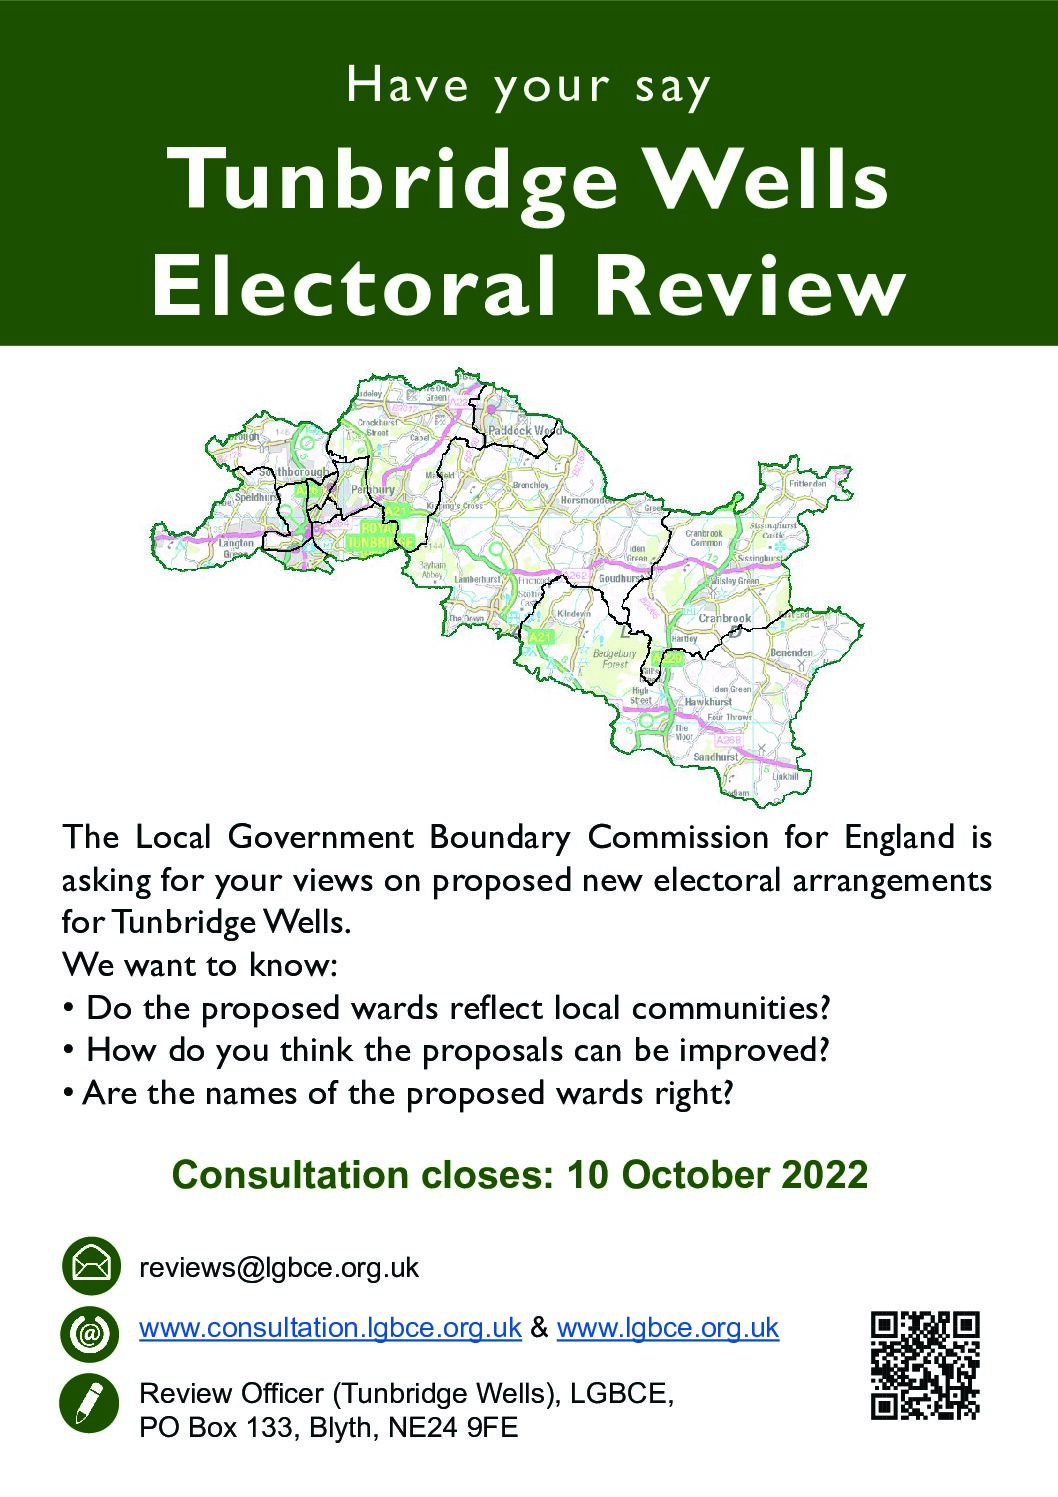 Tunbridge Wells Electoral Review – Local Government Boundary Commission for England Consultation